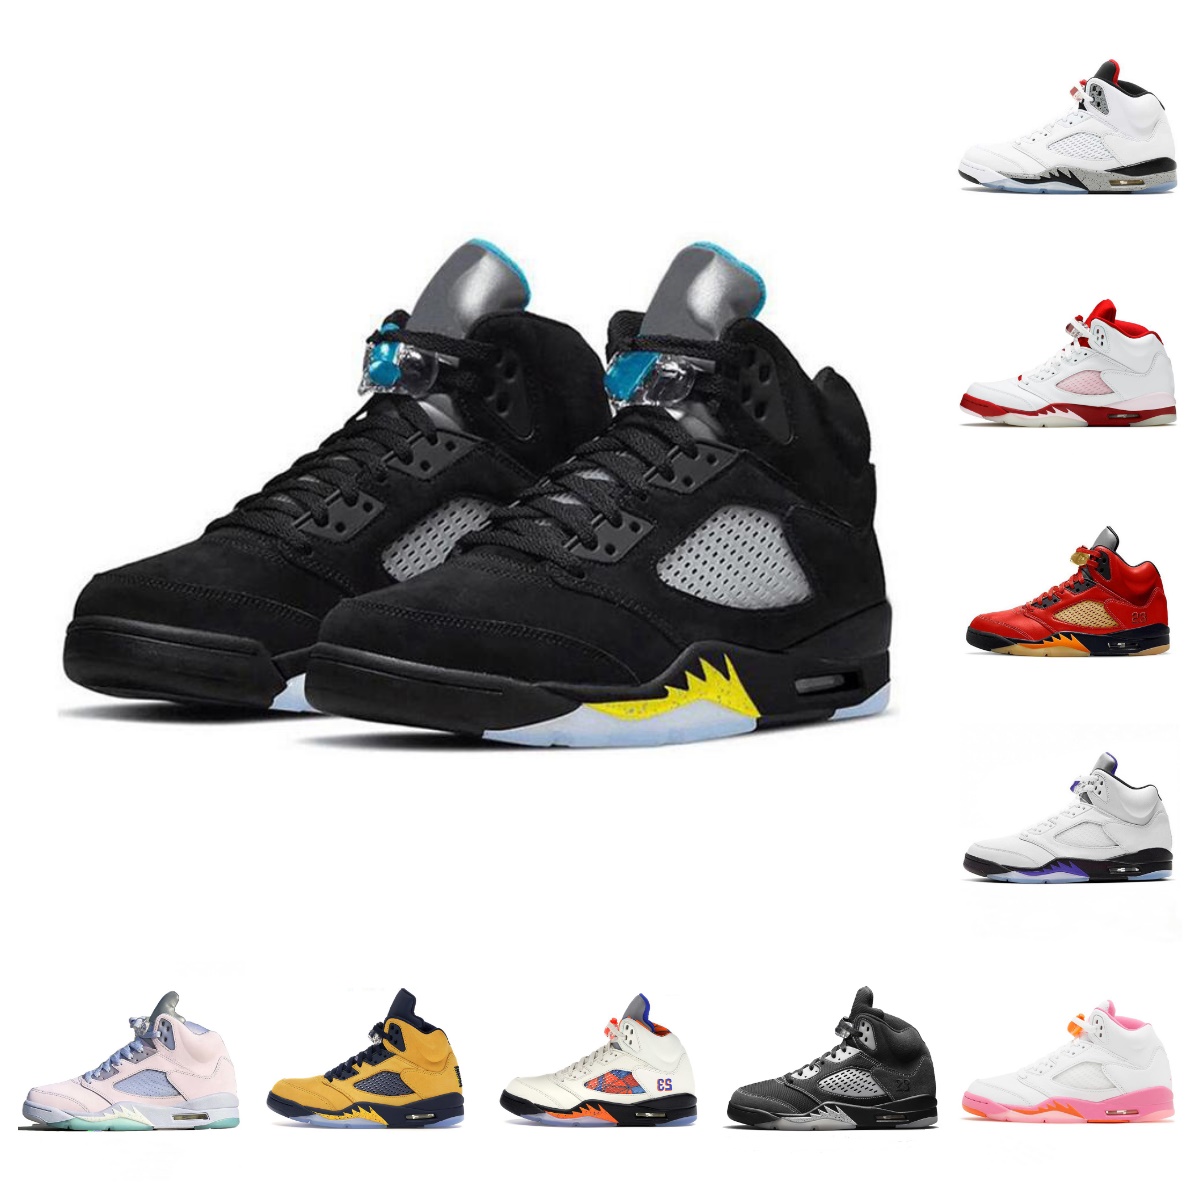 Jumpman 5 5s Basketball Shoes Mens Oreo Sail White Cement Dark Concord Green Bean Raging Racer Blue Fire Red Silver Black Metallic Alternate Grape What The Sneakers